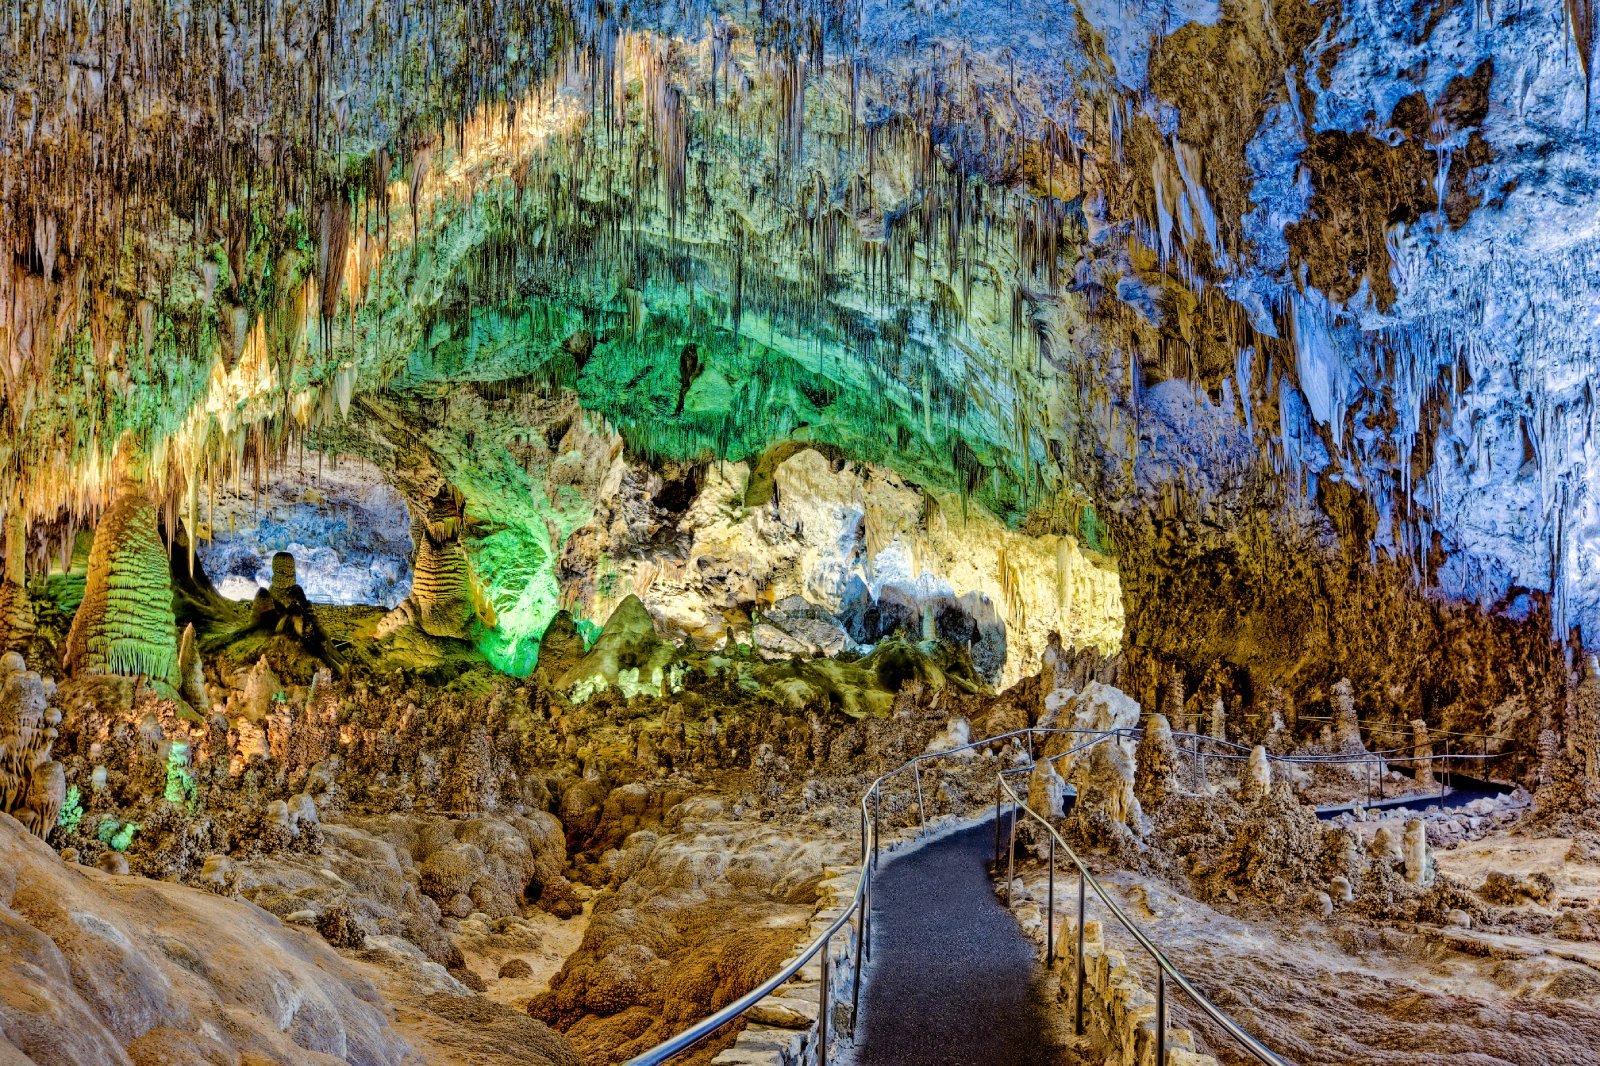 Image Credit: Shutterstock / Doug Meek <p><span>Descend into an underground world of extraordinary cave formations. The guided tours are informative, but the walk can be strenuous. Wear comfortable shoes.</span></p>